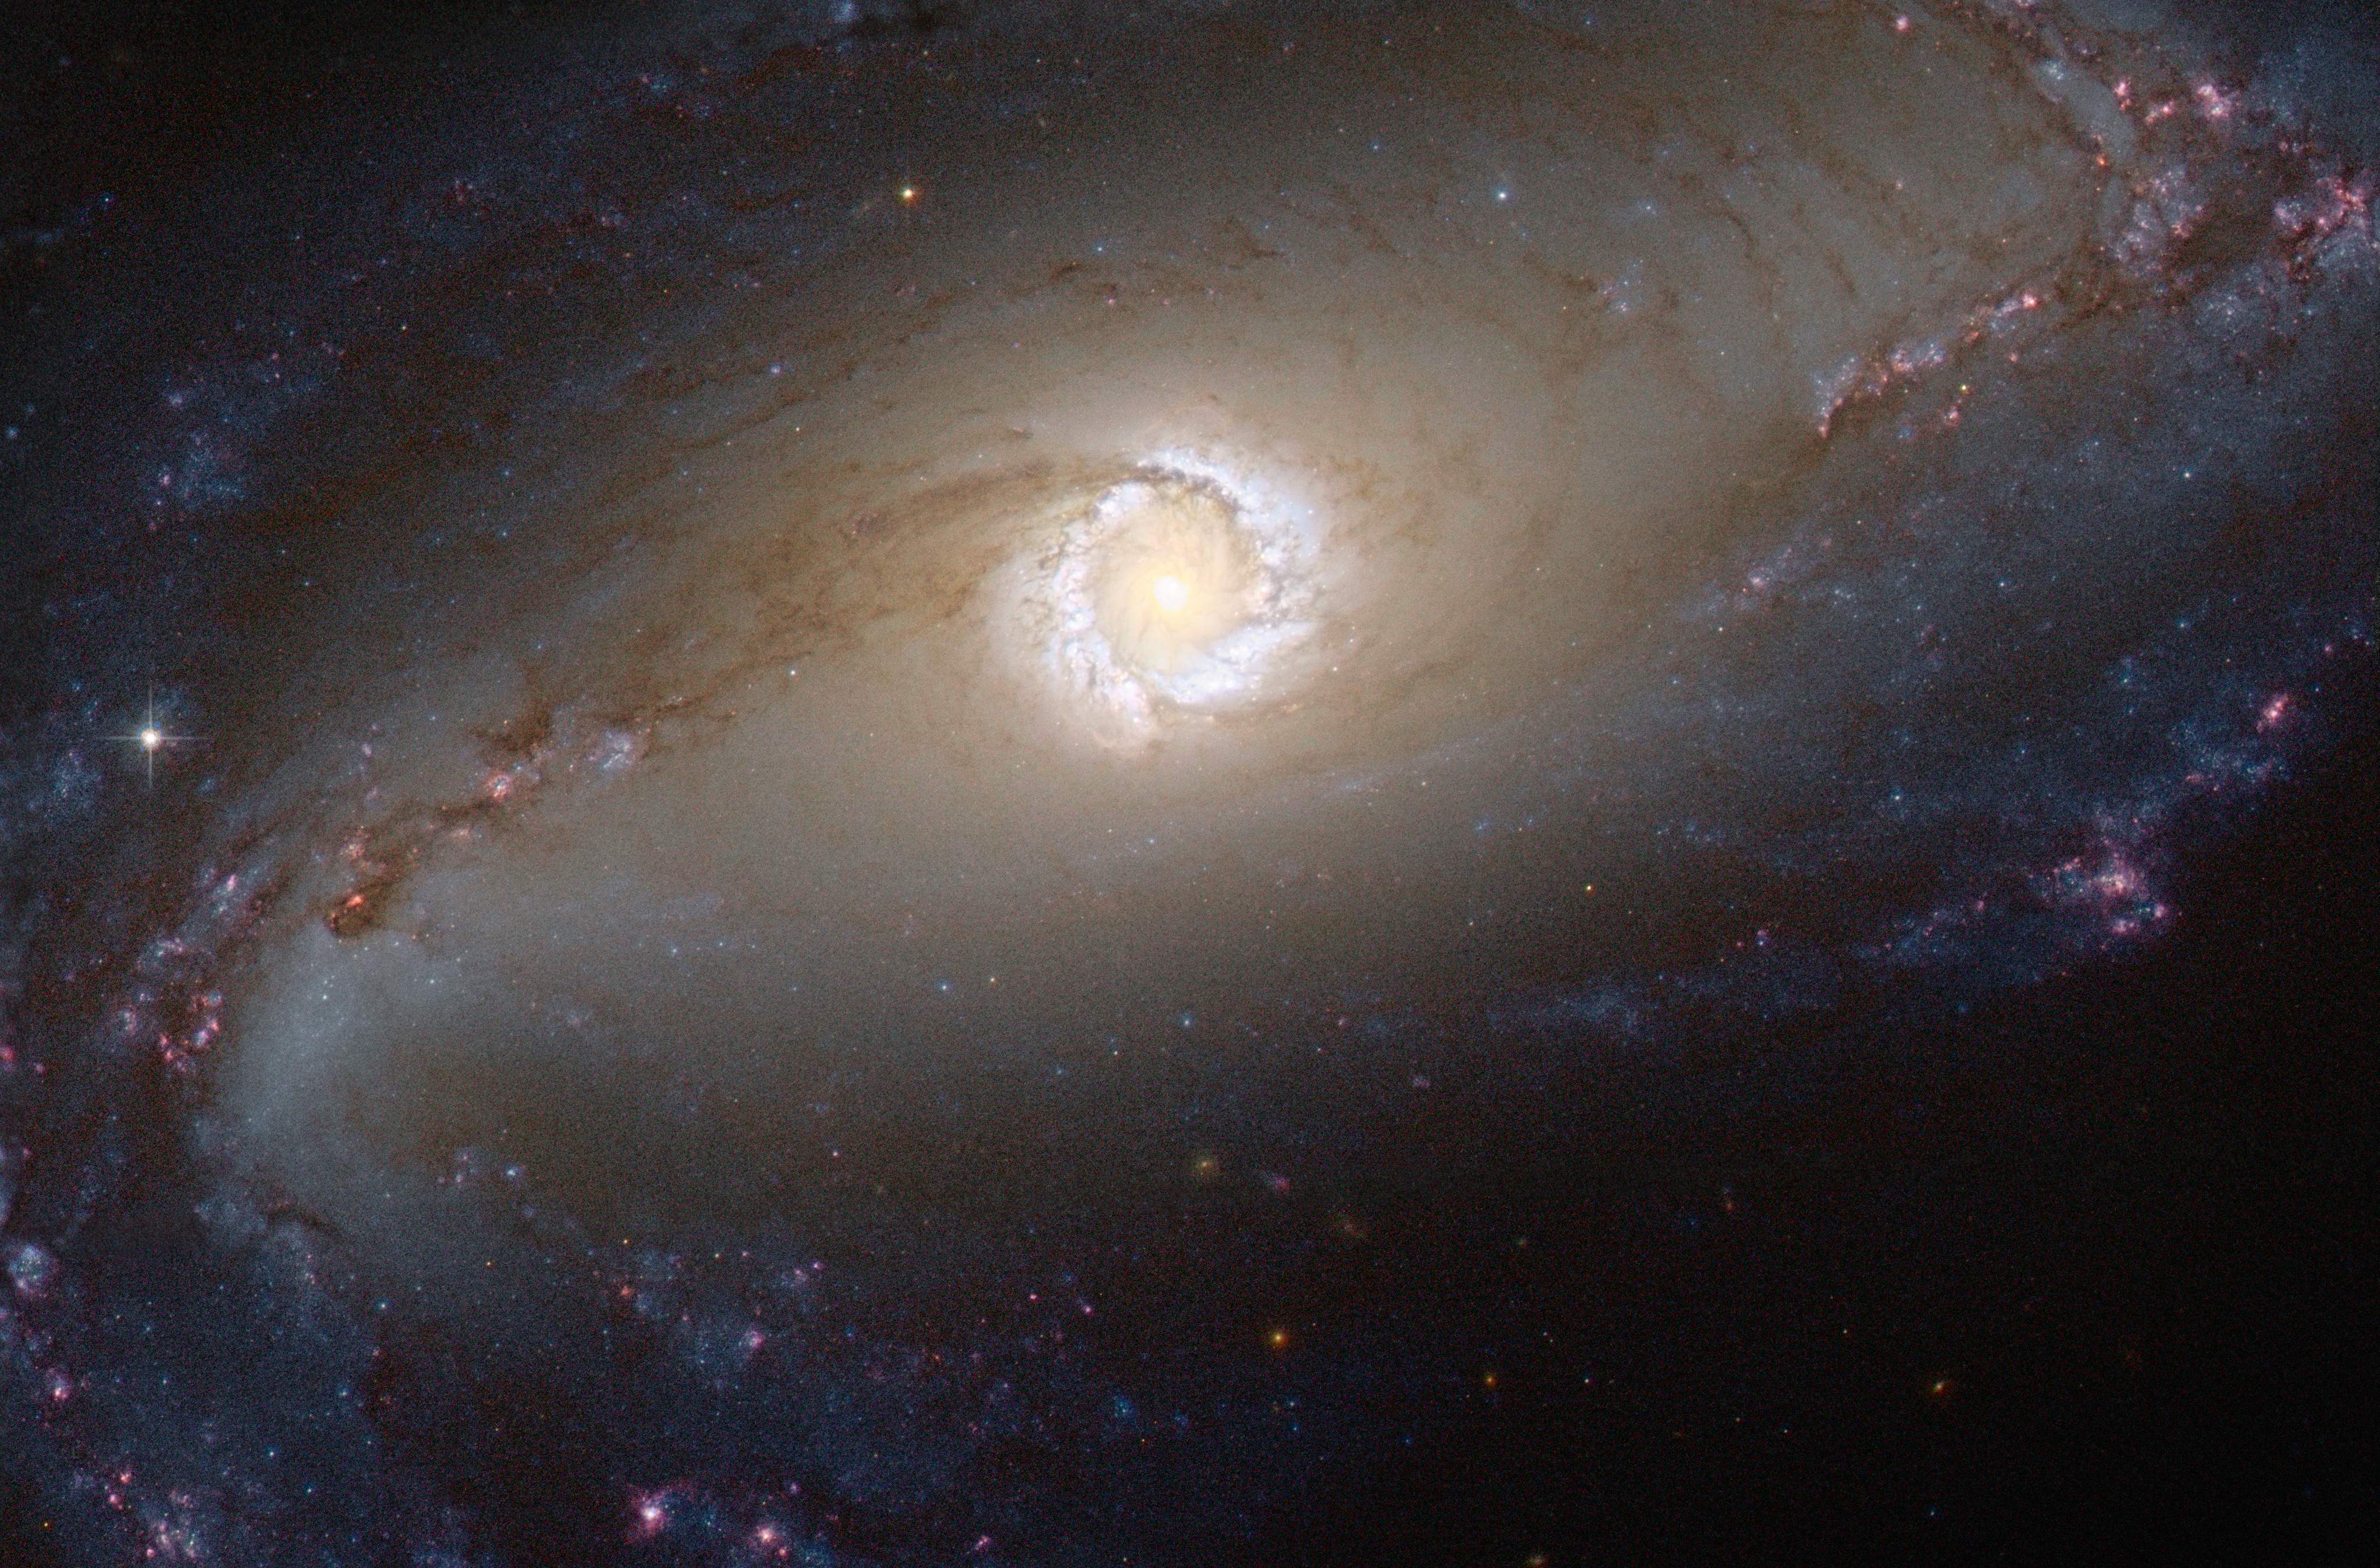 The NASA/ESA Hubble Space Telescope provides us this week with a spectacular image of the bright star-forming ring that surrounds the heart of the barred spiral galaxy NGC 1097. In this image, the larger-scale structure of the galaxy is barely visible: its comparatively dim spiral arms, which surround its heart in a loose embrace, reach out beyond the edges of this frame. This face-on galaxy, lying 45 million light-years away from Earth in the southern constellation of Fornax (The Furnace), is particularly attractive for astronomers. NGC 1097 is a Seyfert galaxy. Lurking at the very centre of the galaxy, a supermassive black hole 100 million times the mass of our Sun is gradually sucking in the matter around it. The area immediately around the black hole shines powerfully with radiation coming from the material falling in. The distinctive ring around the black hole is bursting with new star formation due to an inflow of material toward the central bar of the galaxy. These star-forming regions are glowing brightly thanks to emission from clouds of ionised hydrogen. The ring is around 5000 light-years across, although the spiral arms of the galaxy extend tens of thousands of light-years beyond it. NGC 1097 is also pretty exciting for supernova hunters. The galaxy experienced three supernovae (the violent deaths of high-mass stars) in the 11-year span between 1992 and 2003. This is definitely a galaxy worth checking on a regular basis. However, what it is really exciting about NGC 1097 is that it is not wandering alone through space. It has two small galaxy companions, which dance “the dance of stars and the dance of space” like the gracious dancer of the famous poem The Dancer by Khalil Gibran. The satellite galaxies are NGC 1097A, an elliptical galaxy orbiting 42 000 light-years from the centre of NGC 1097 and a small dwarf galaxy named NGC 1097B. Both galaxies are located out beyond the frames of this image and they cannot be seen. Astronomers have indications that NGC 1097 and NGC 1097A have interacted in the past. This picture was taken with Hubble’s Advanced Camera for Surveys using visual and infrared filters. A version of this image was submitted to the Hubble’s Hidden Treasures image processing competition by contestant Eedresha Sturdivant.